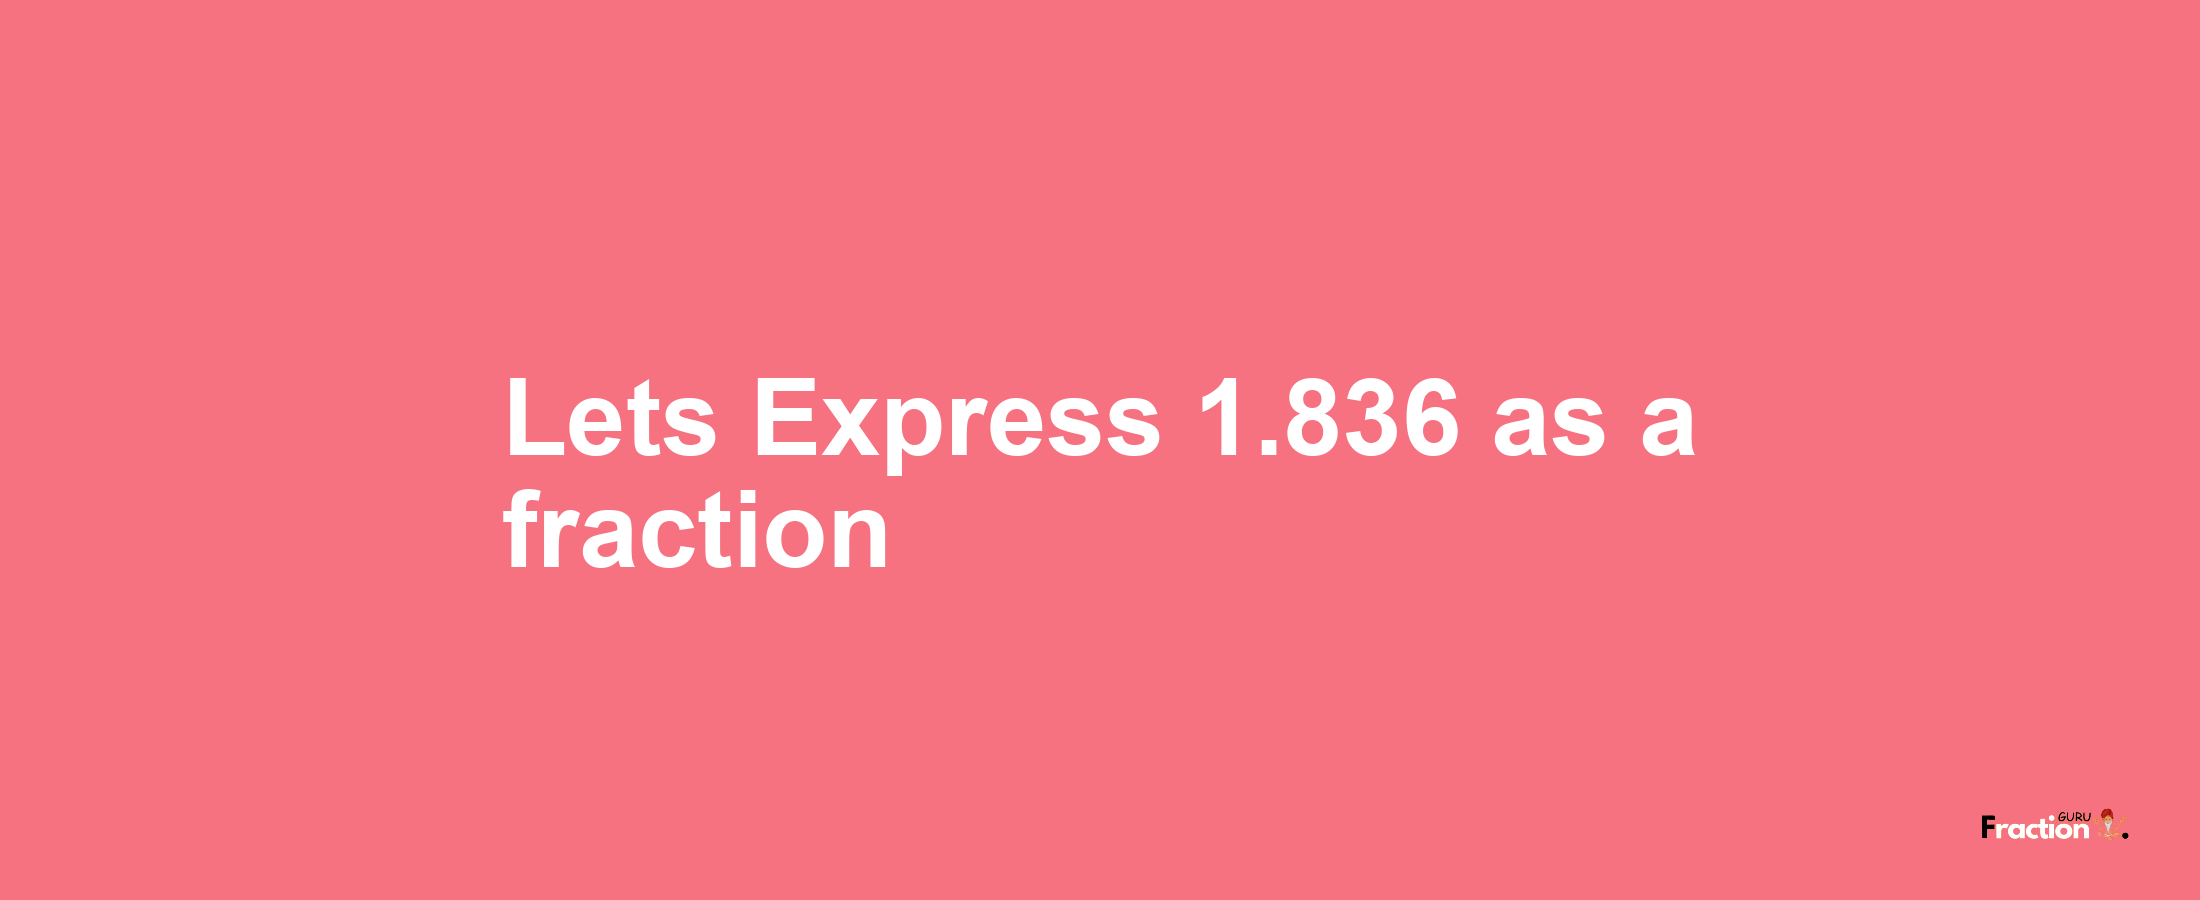 Lets Express 1.836 as afraction